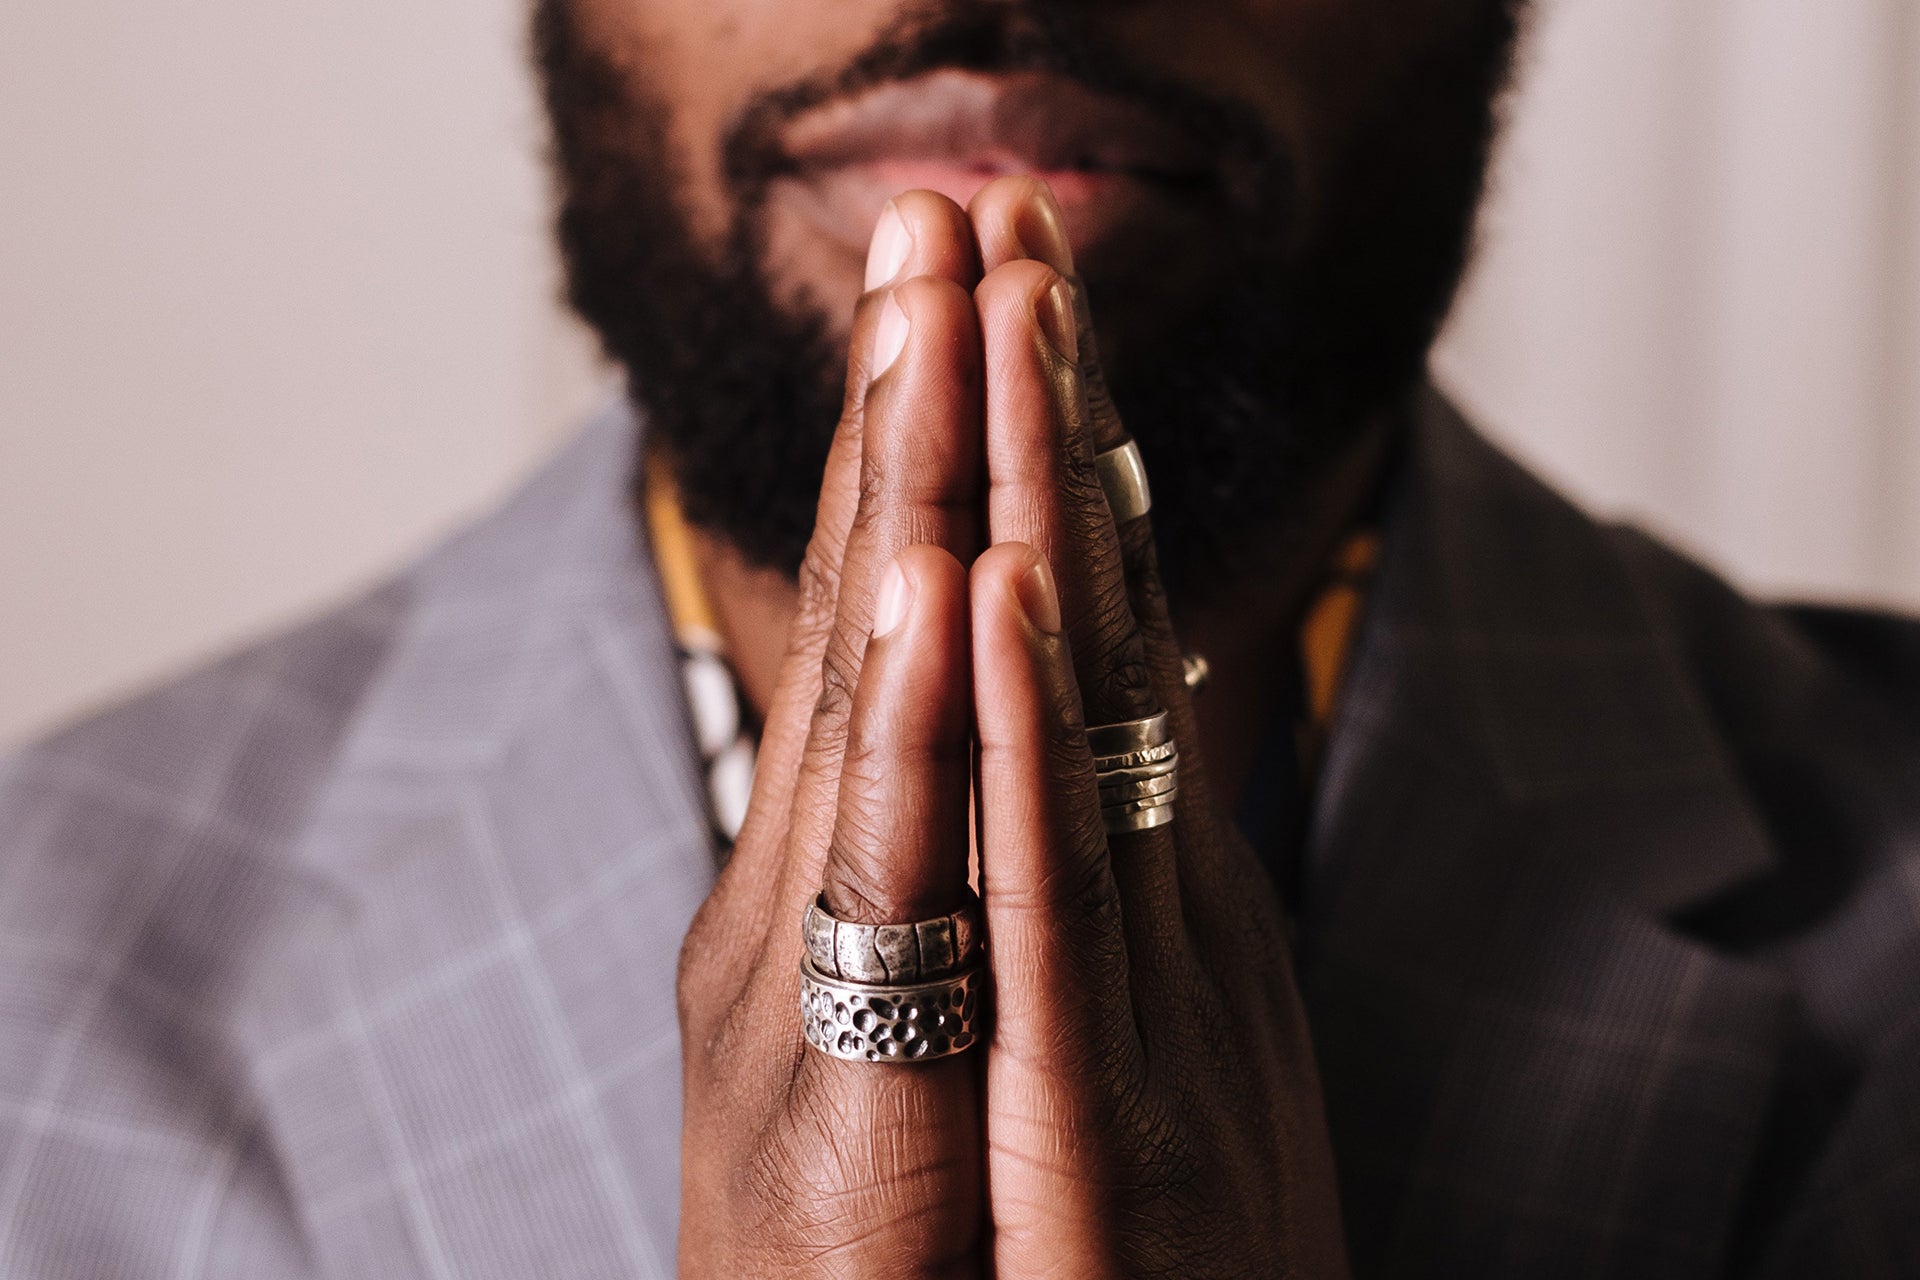 Are Men's Rings Fashionable?